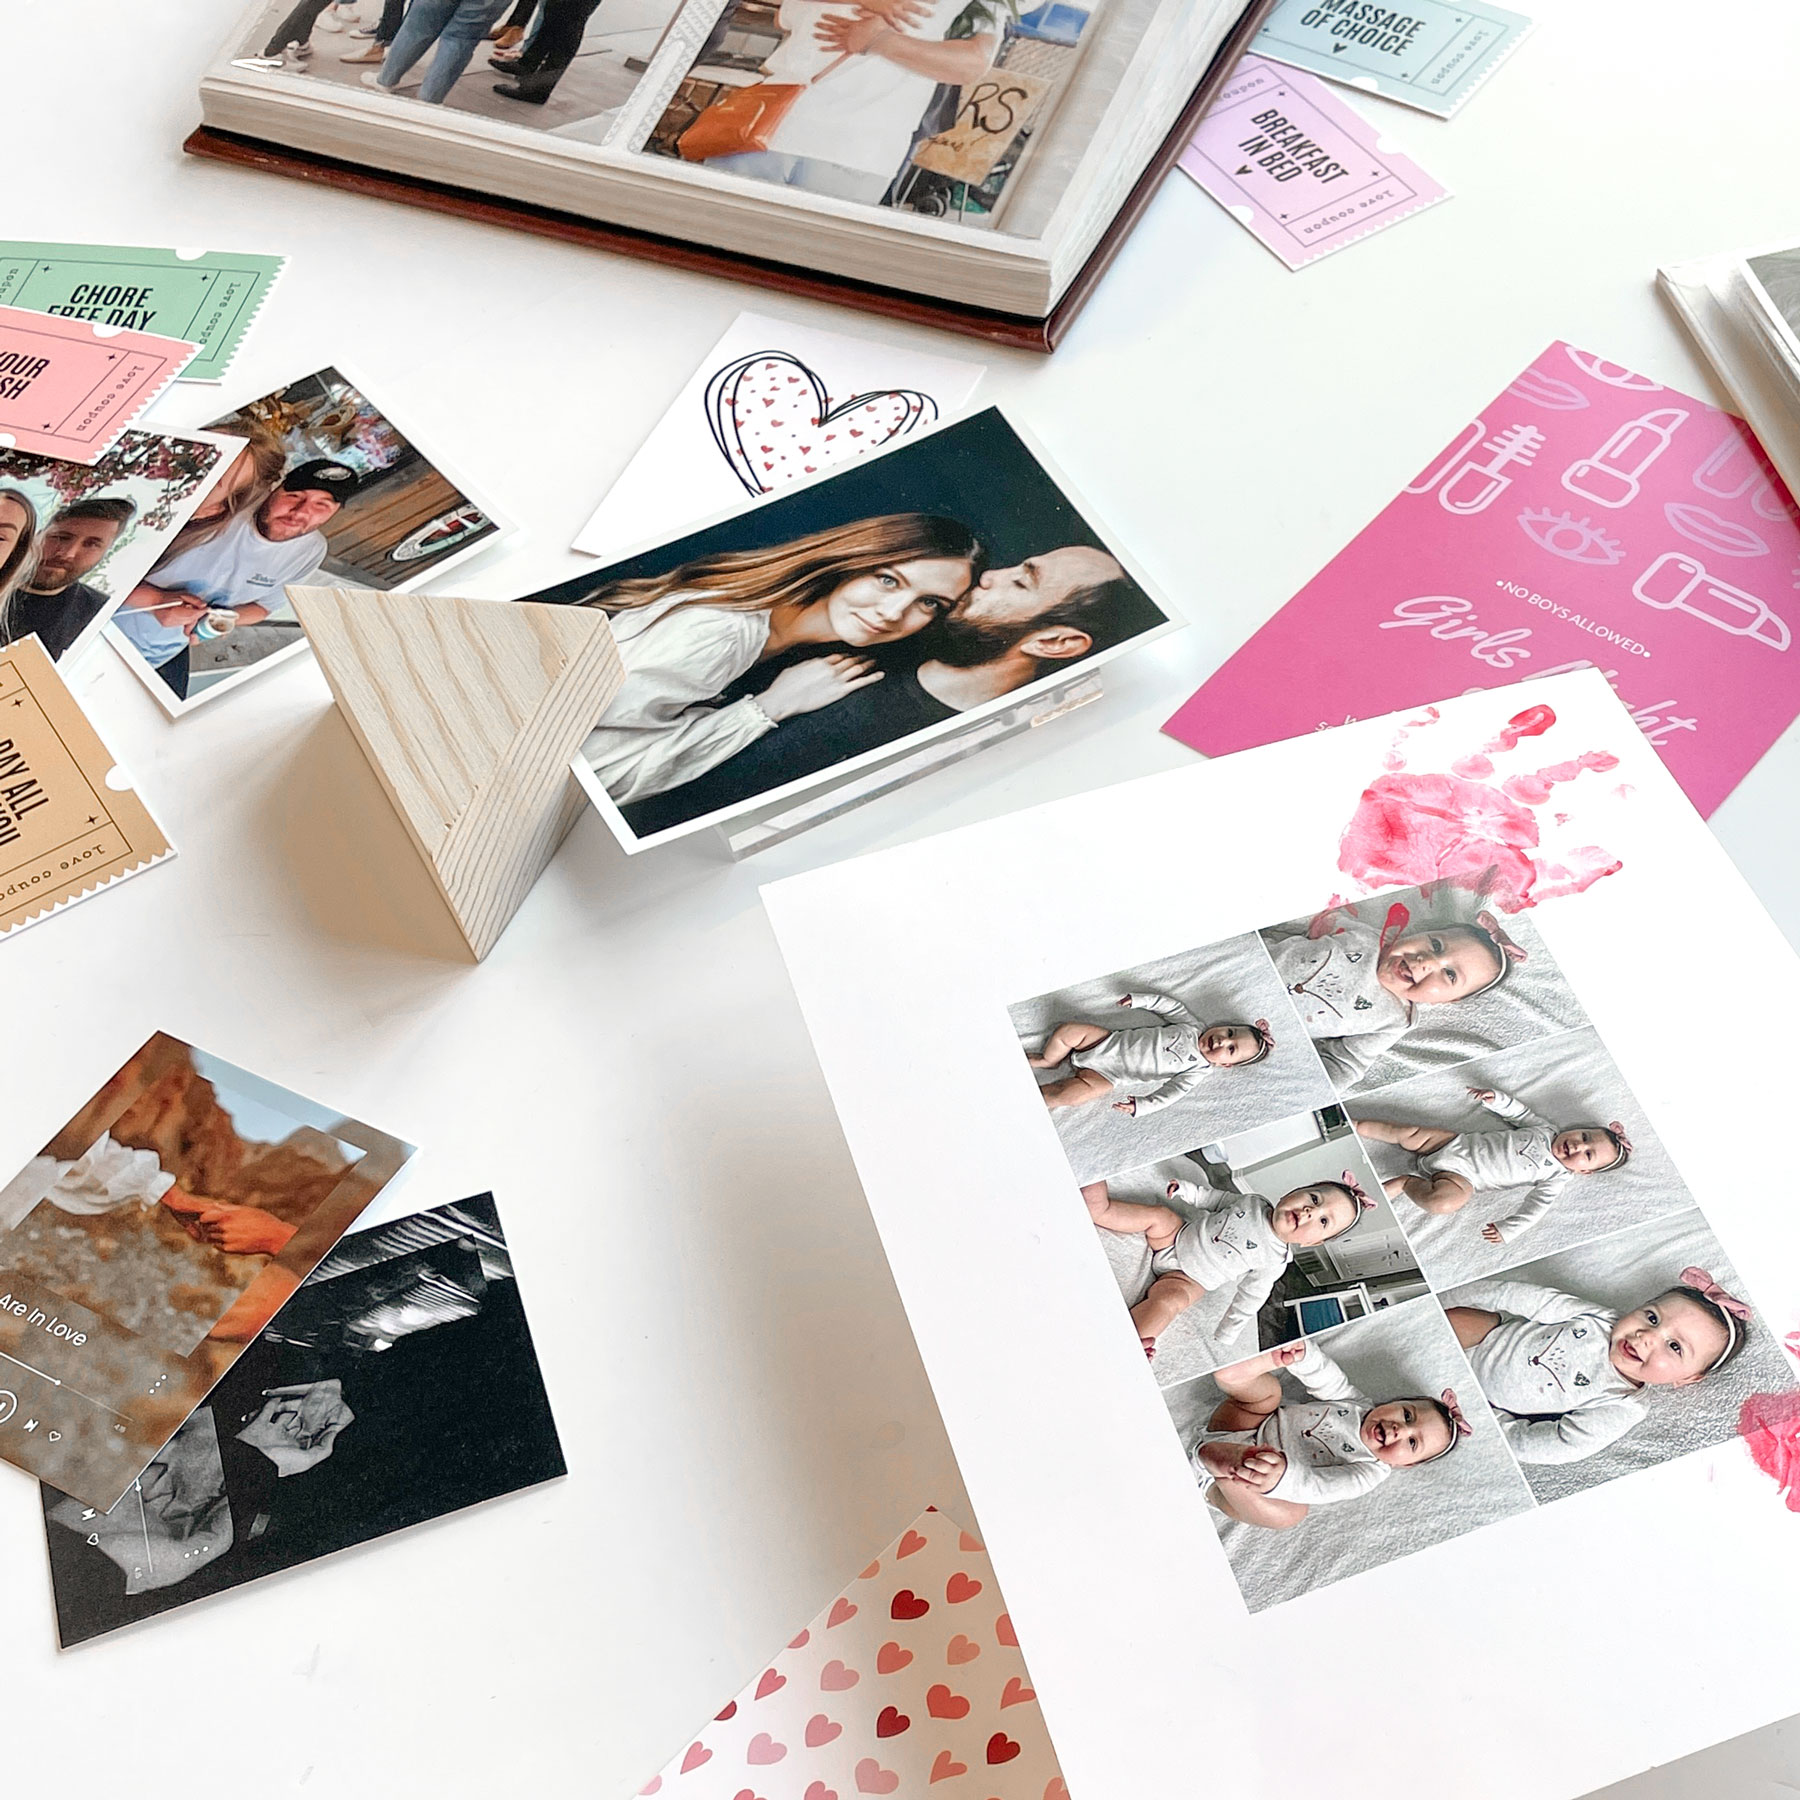  8 Personalized Photo Valentine's Gift Ideas